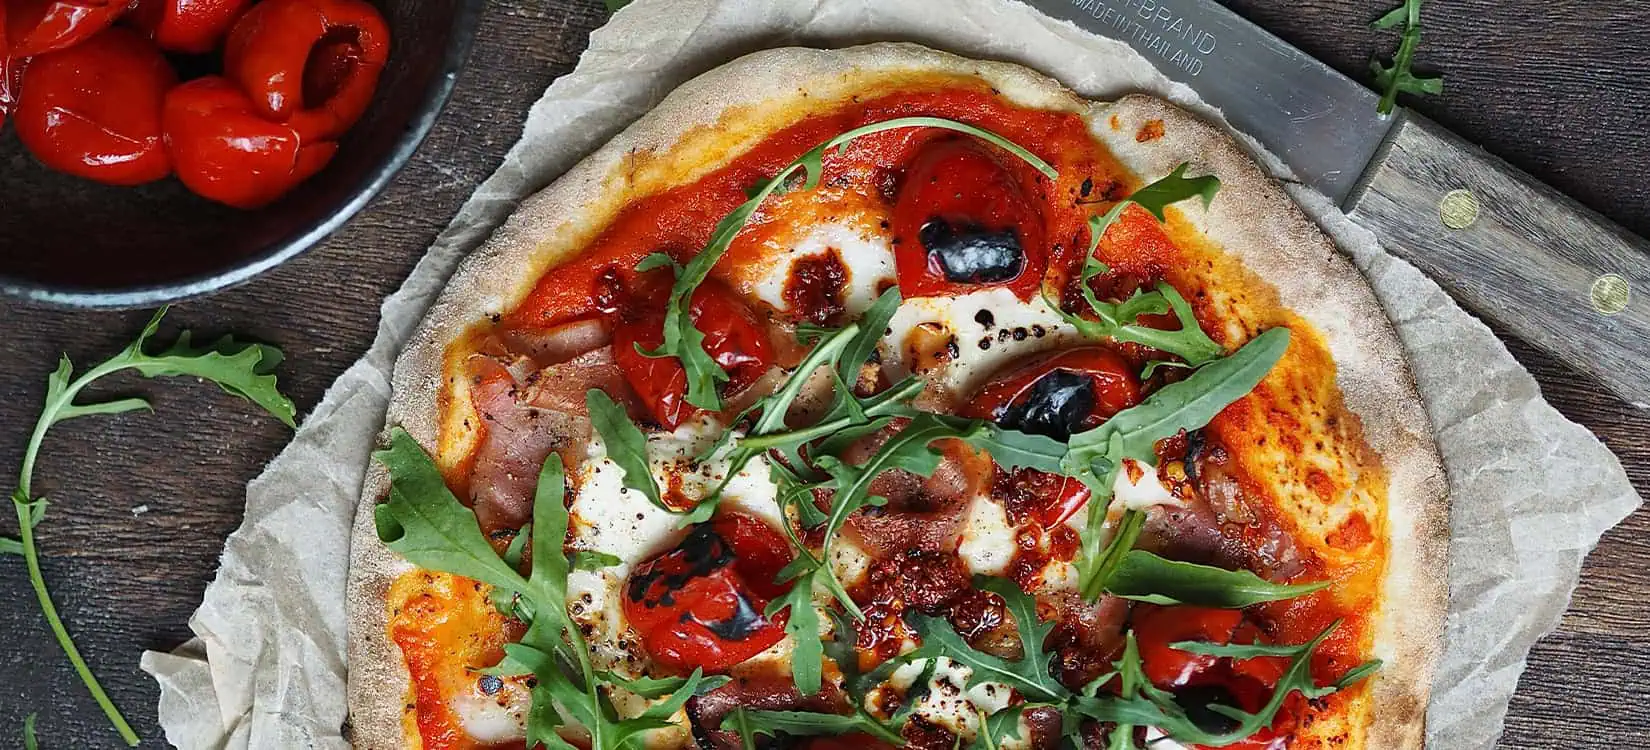 Sweet Piquanté Pepper Flatbread Pizza with Goats Cheese and Prosciutto